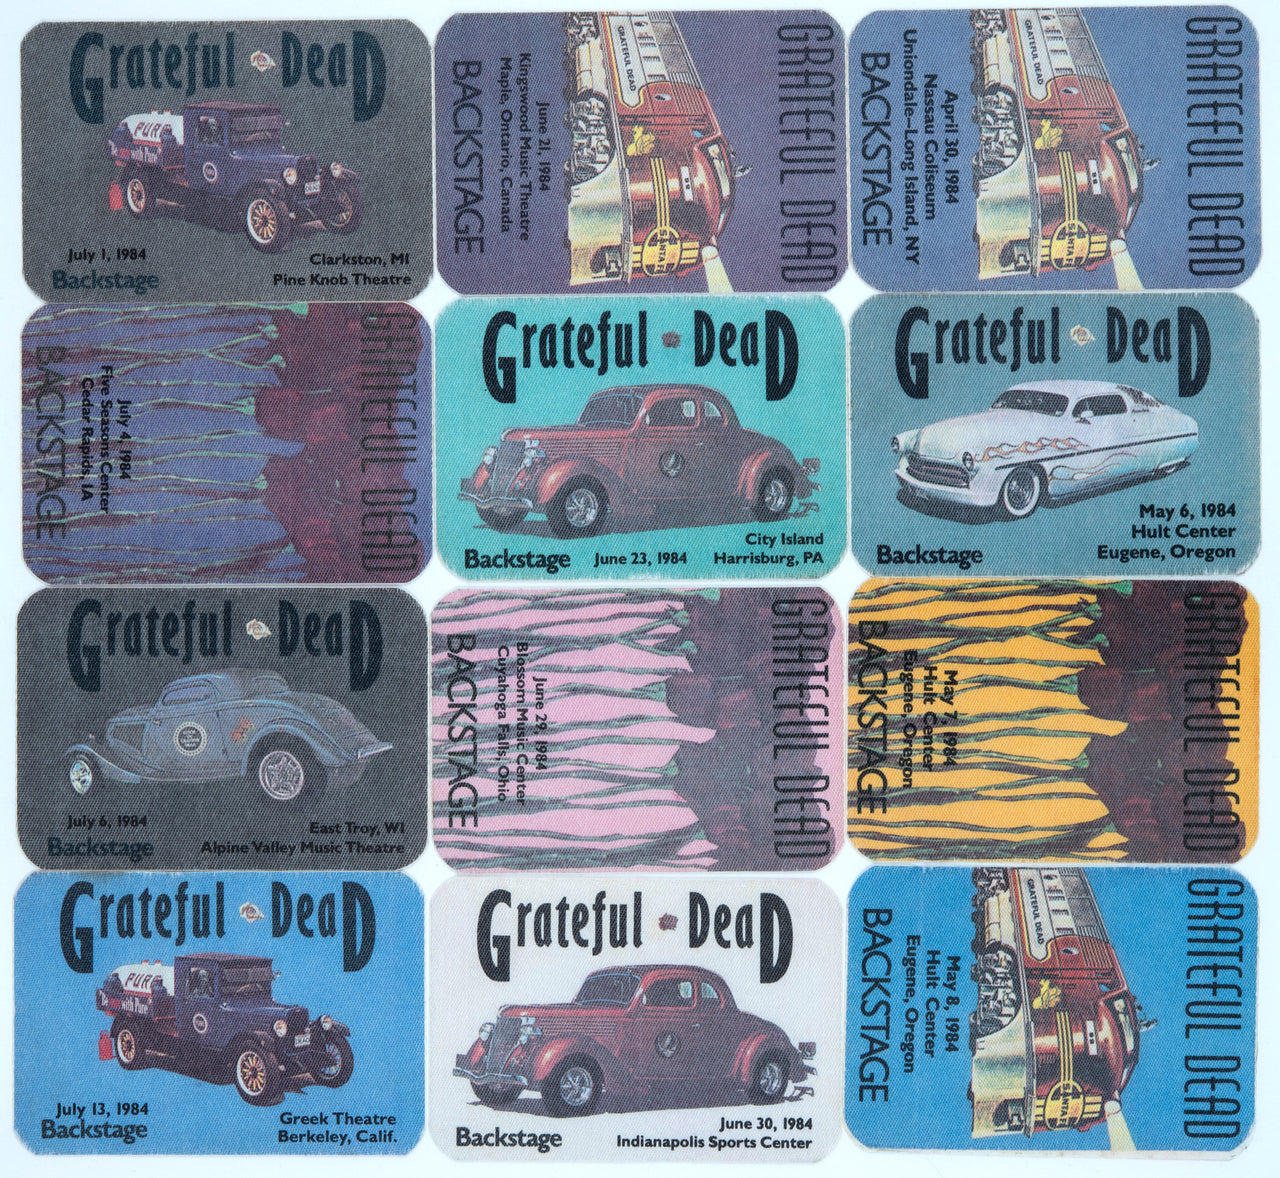 Grateful Dead Backstage Passes (4/30/1984 - 7/13/1984) from Dan Healy